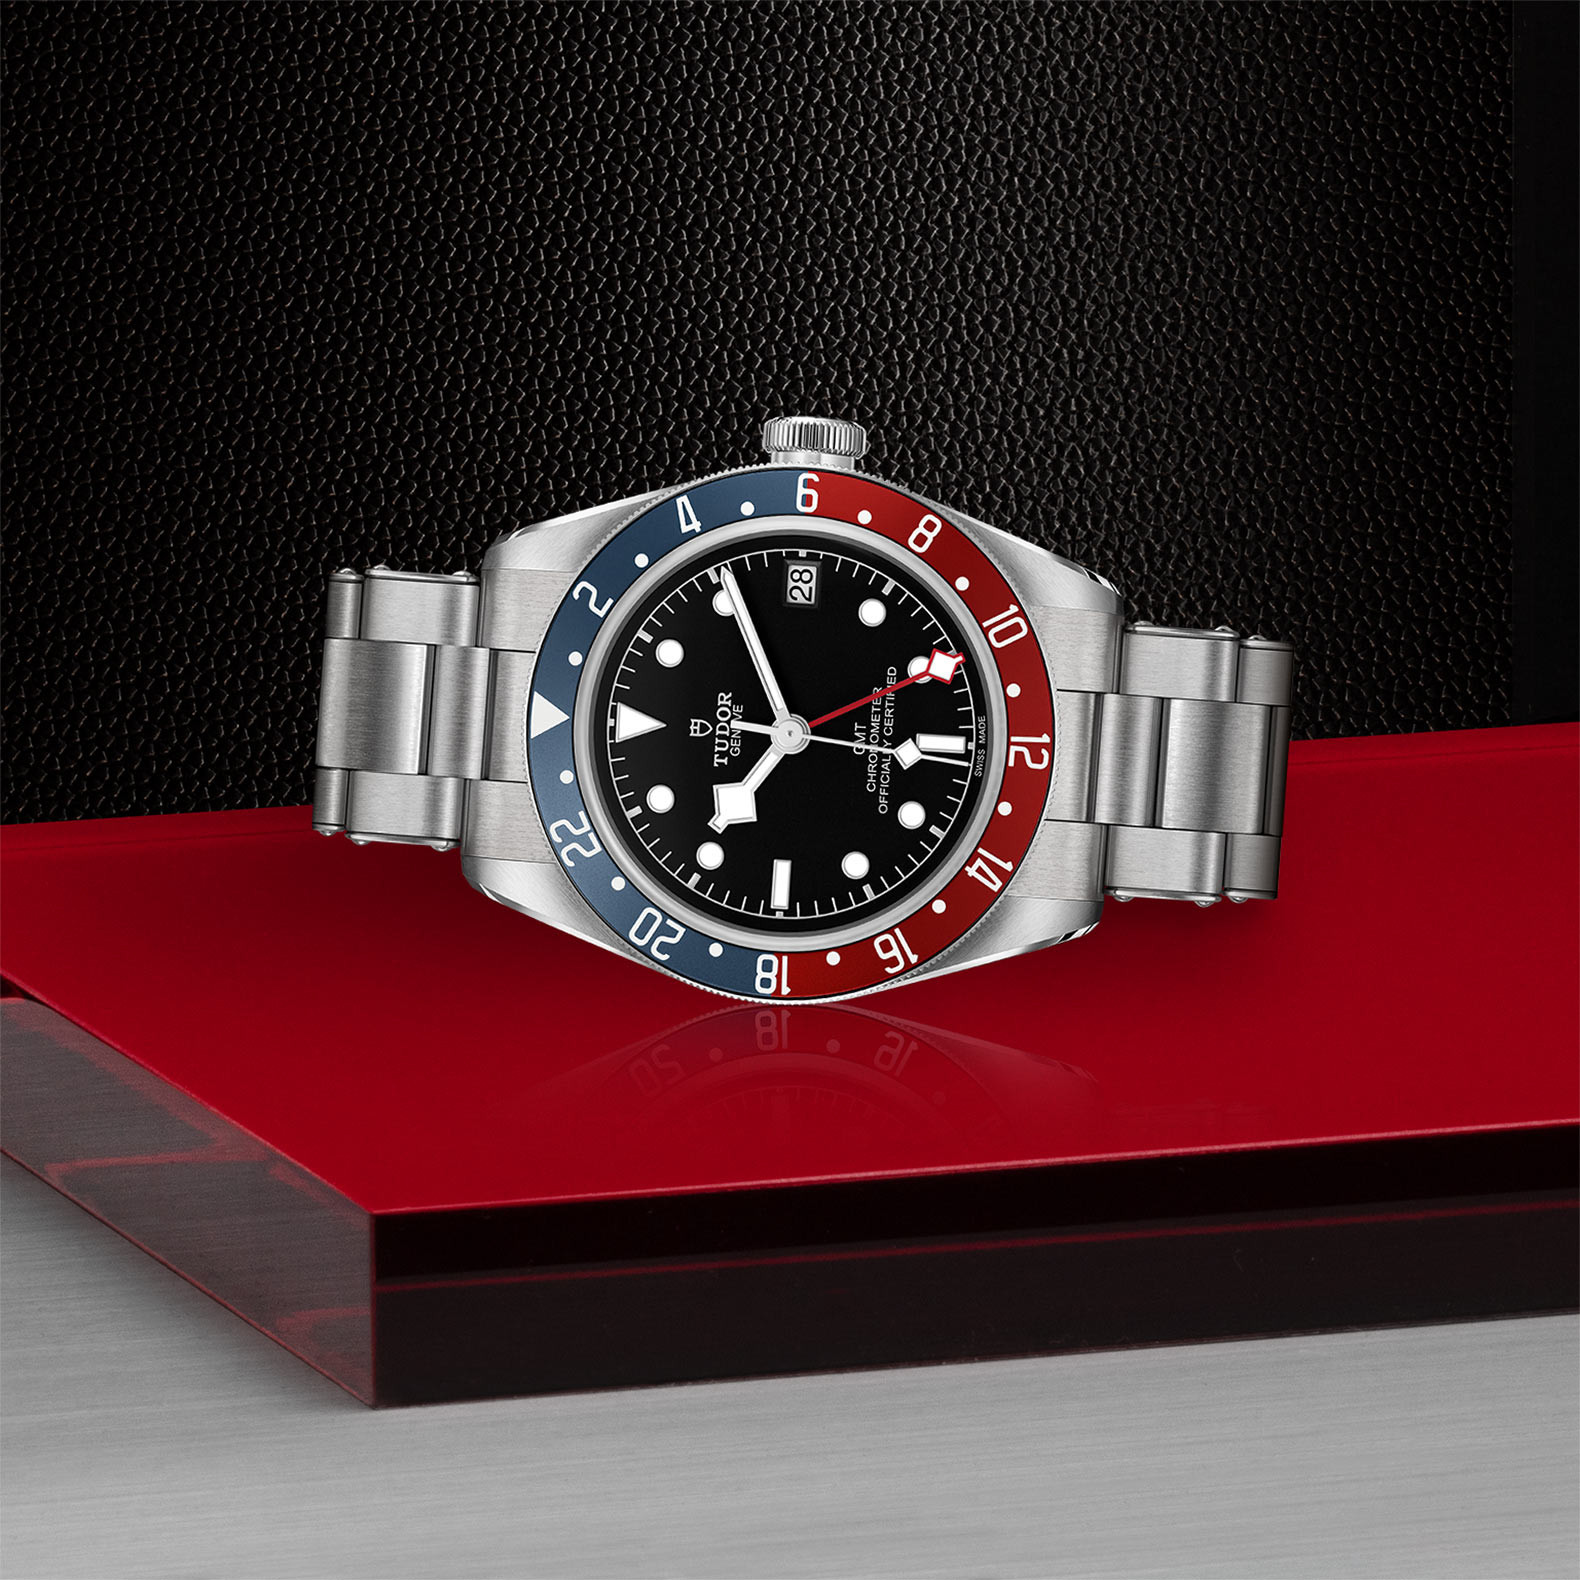 TUDOR Black Bay GMT Watch in Store Laying Down